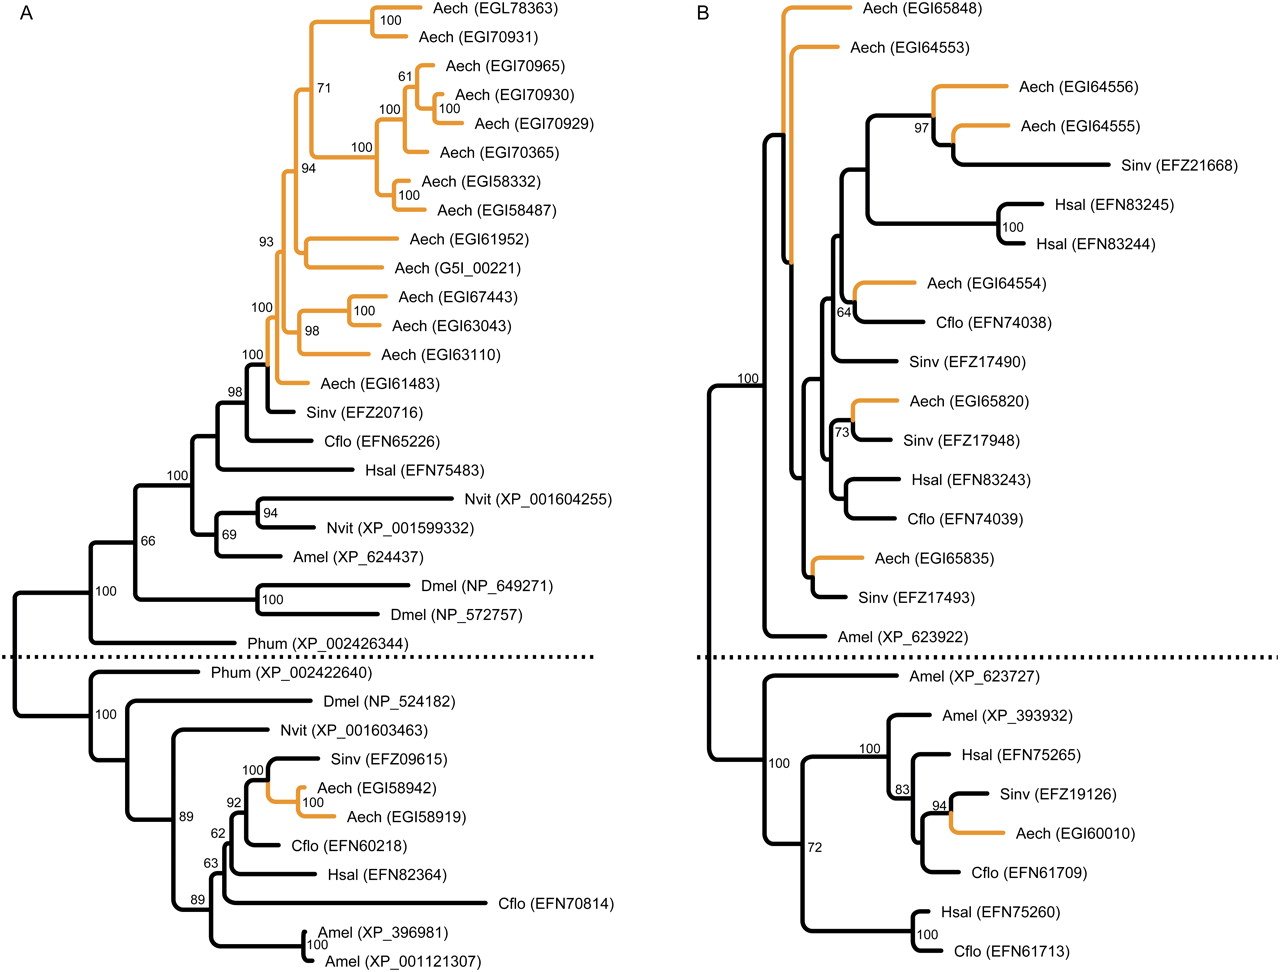 Peptidase expansions in the genome of A. echinatior